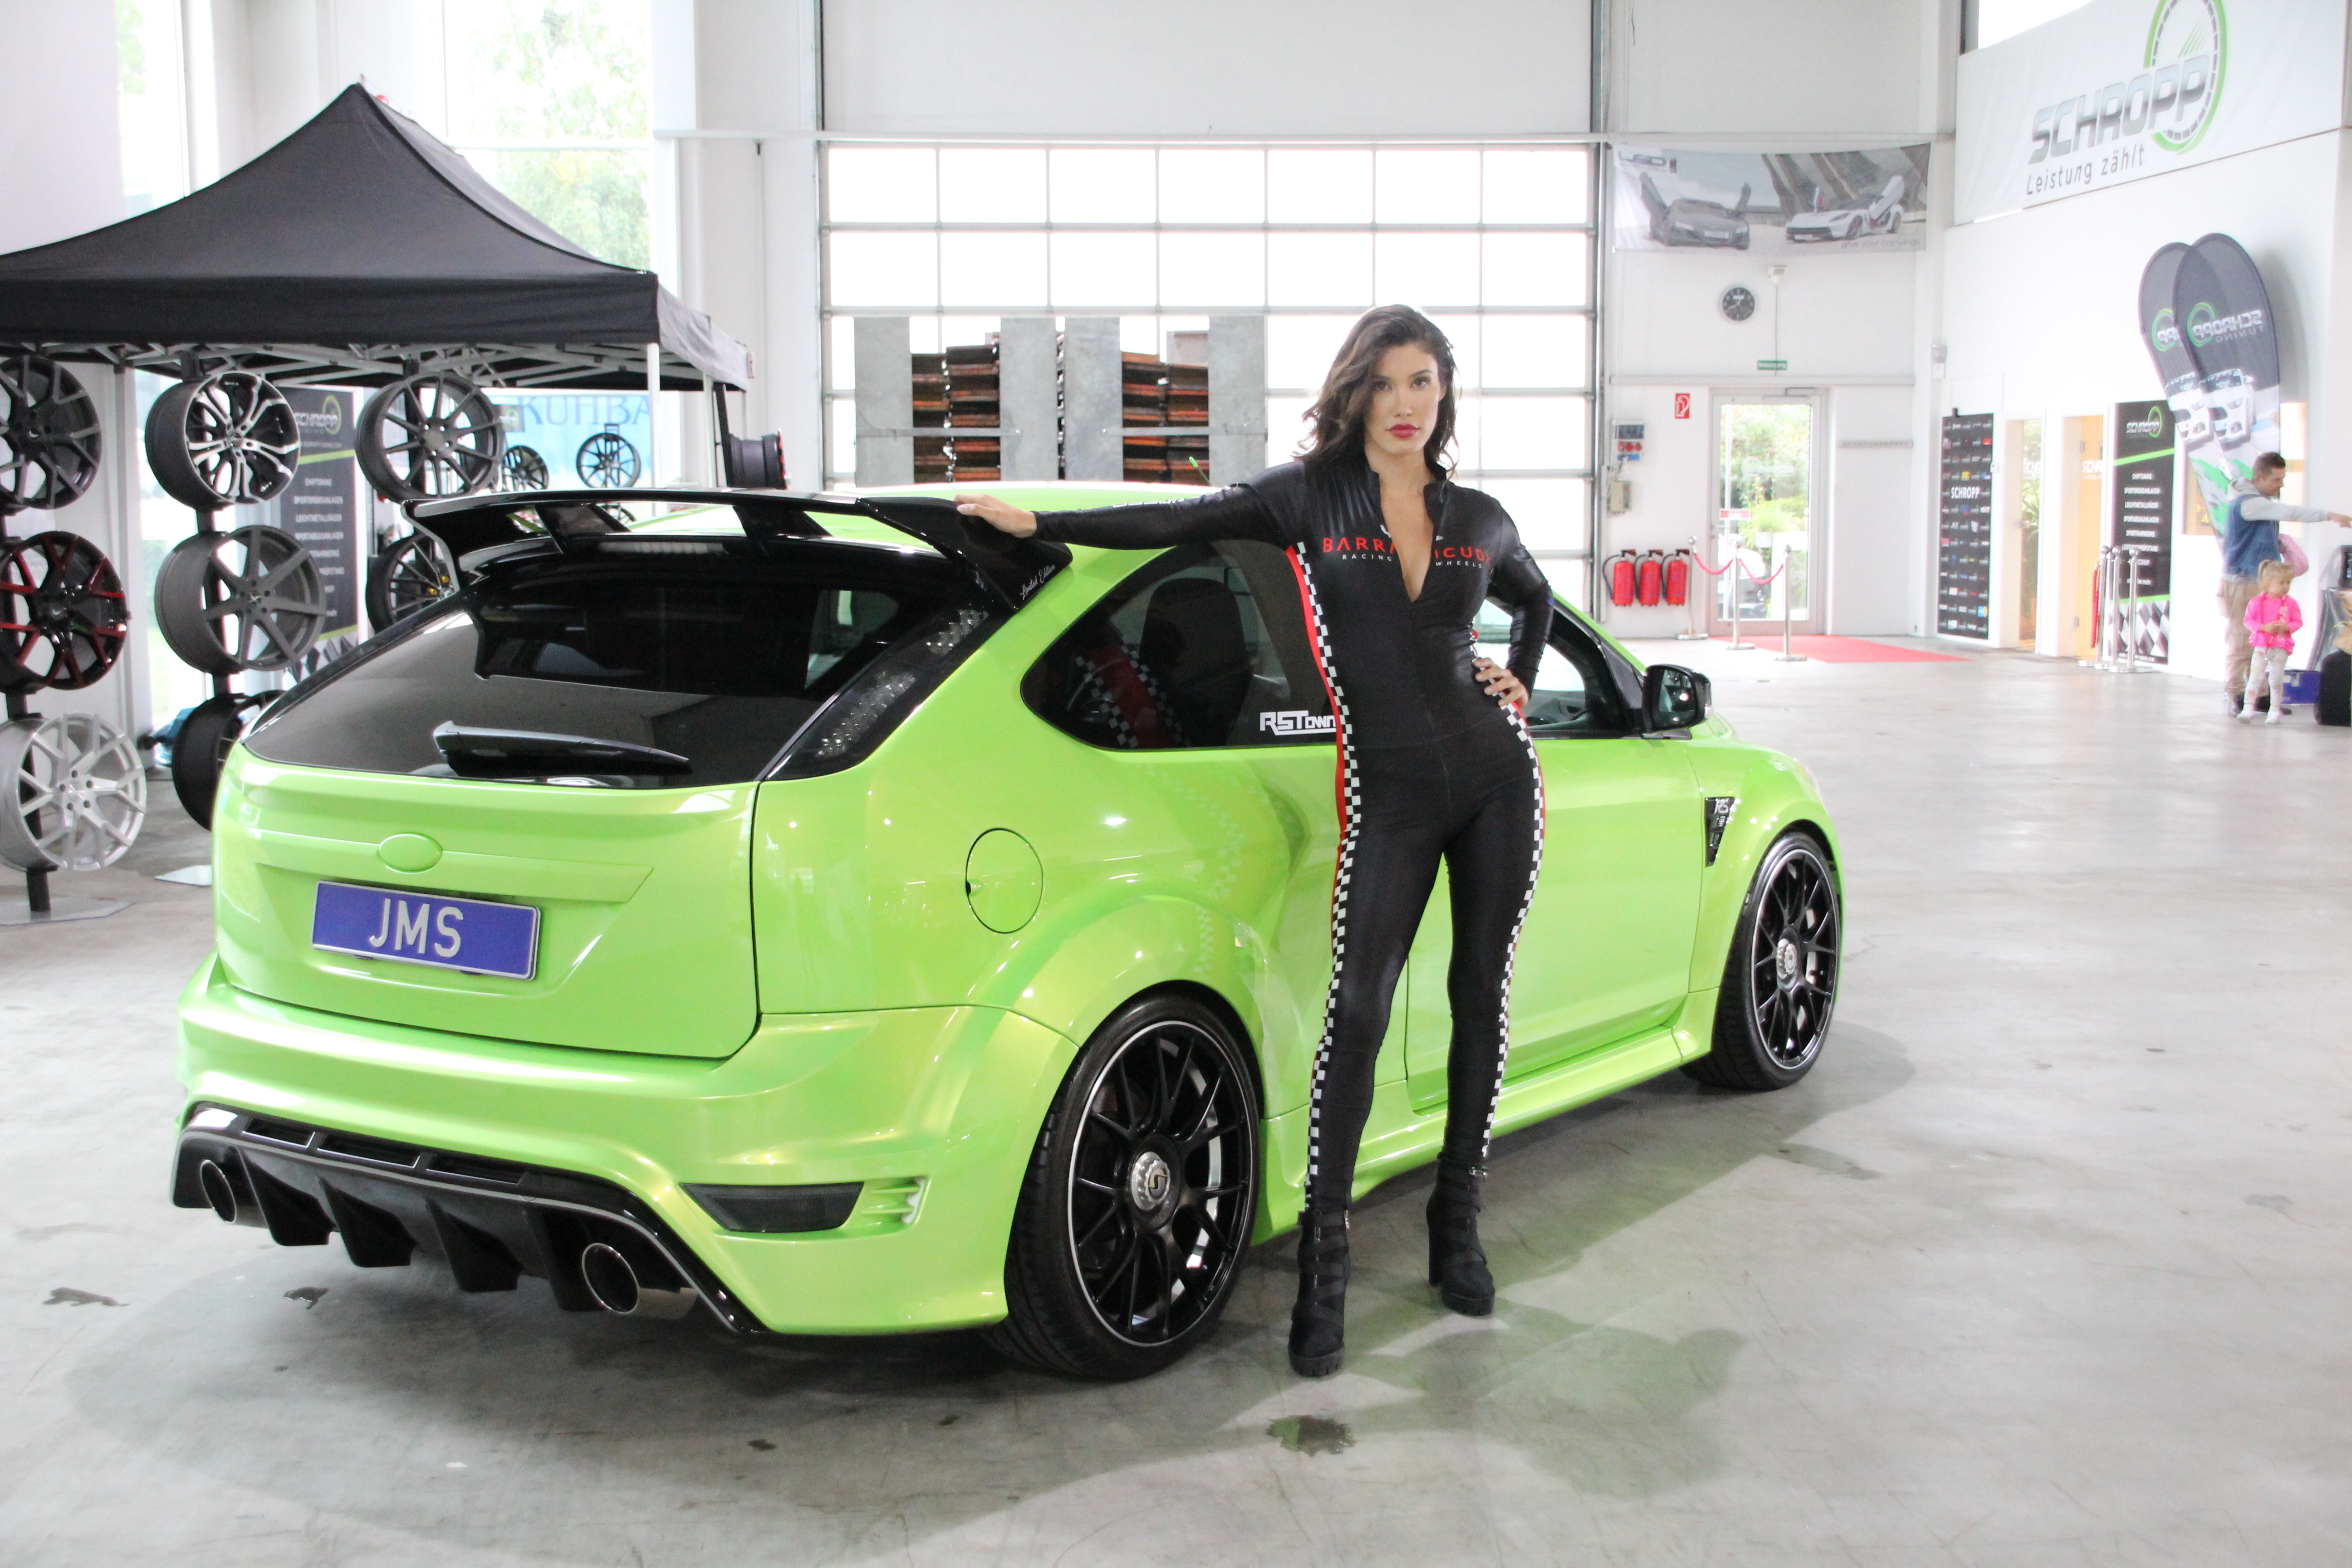 Program car. Ford Focus RS mk2. Ford Focus 2 RS Tuning. Ford Focus RS mk2 Tuning. Форд фокус 2 РС.